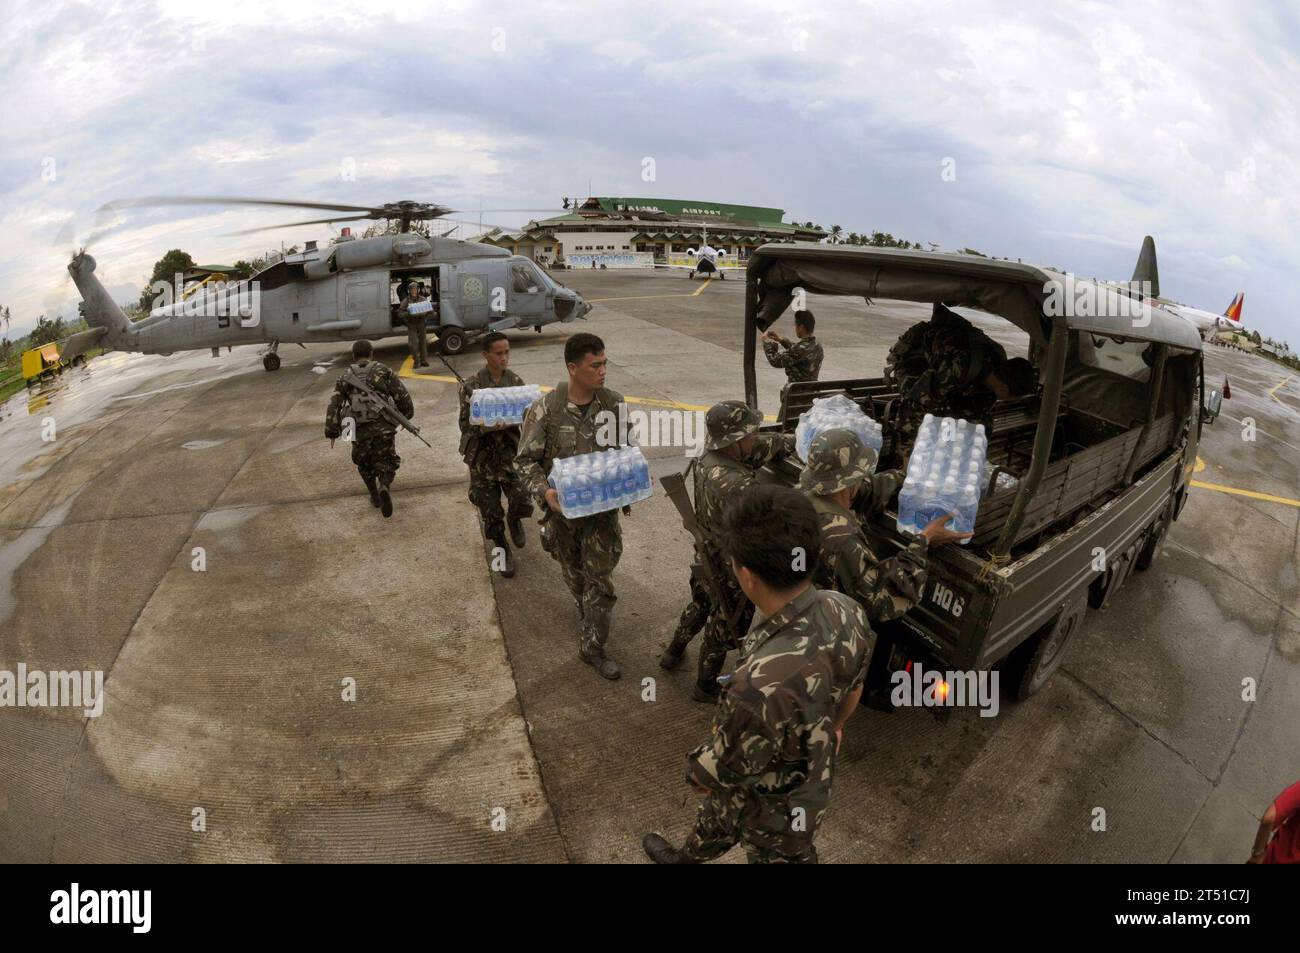 0806265961C-008  KALIBO, Philippines (June 26, 2008) Servicemen from the United States Navy and the Philippine Army work together unloading much needed supplies for people suffering in the wake of Typhoon Fengshen at Kalibo Airport. At the request of the government of the Republic of the Philippines, the Nimitz-class aircraft carrier USS Ronald Reagan (CVN 76) is off the coast of Panay Island providing humanitarian assistance and disaster response. Ronald Reagan and other U.S. Navy ships are operating in the 7th Fleet area of responsibility to promote peace, cooperation and stability. U.S. Nav Stock Photo